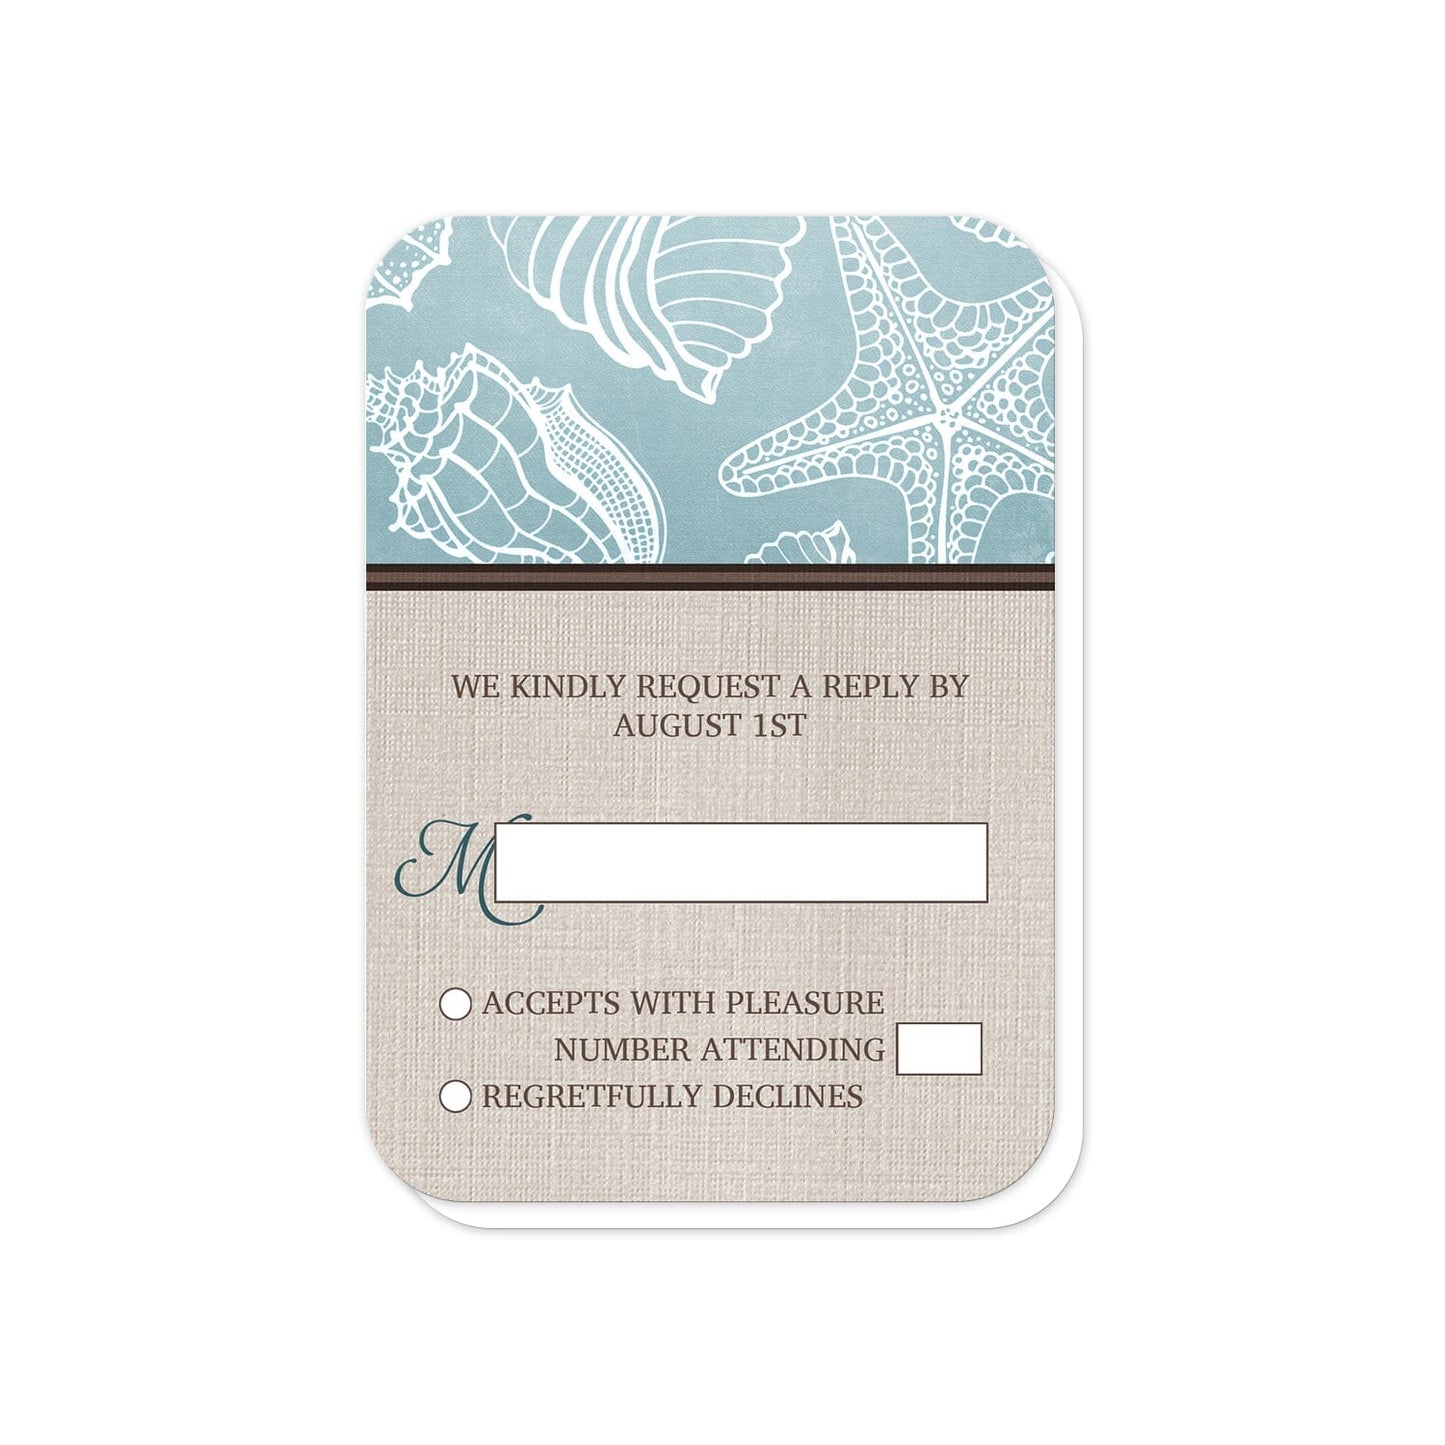 Rustic Beach Linen RSVP Cards (with rounded corners) at Artistically Invited.